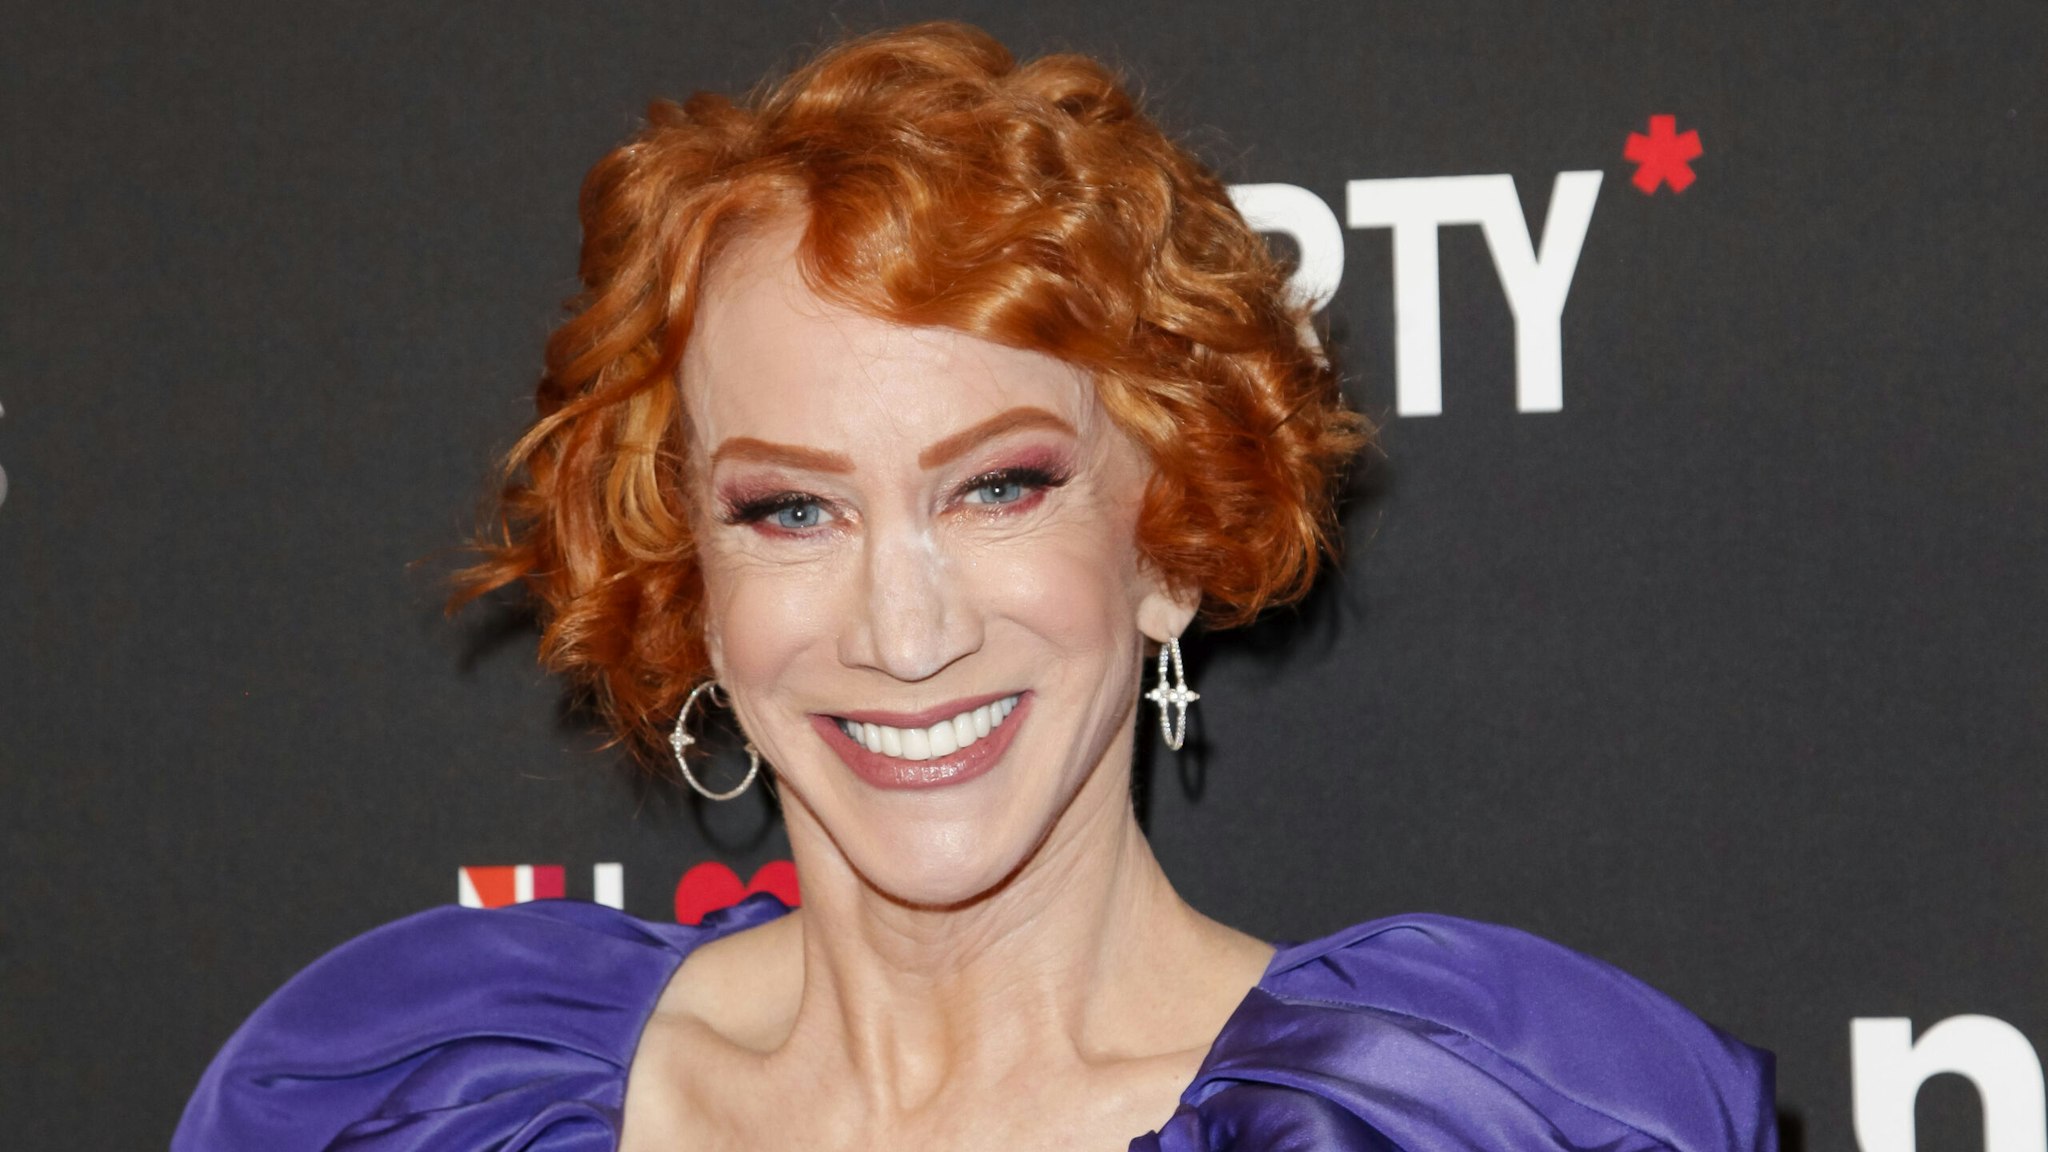 LOS ANGELES, CALIFORNIA - FEBRUARY 25: Kathy Griffin attends The Queerties 2020 Awards Reception at LA Liason on February 25, 2020 in Los Angeles, California.